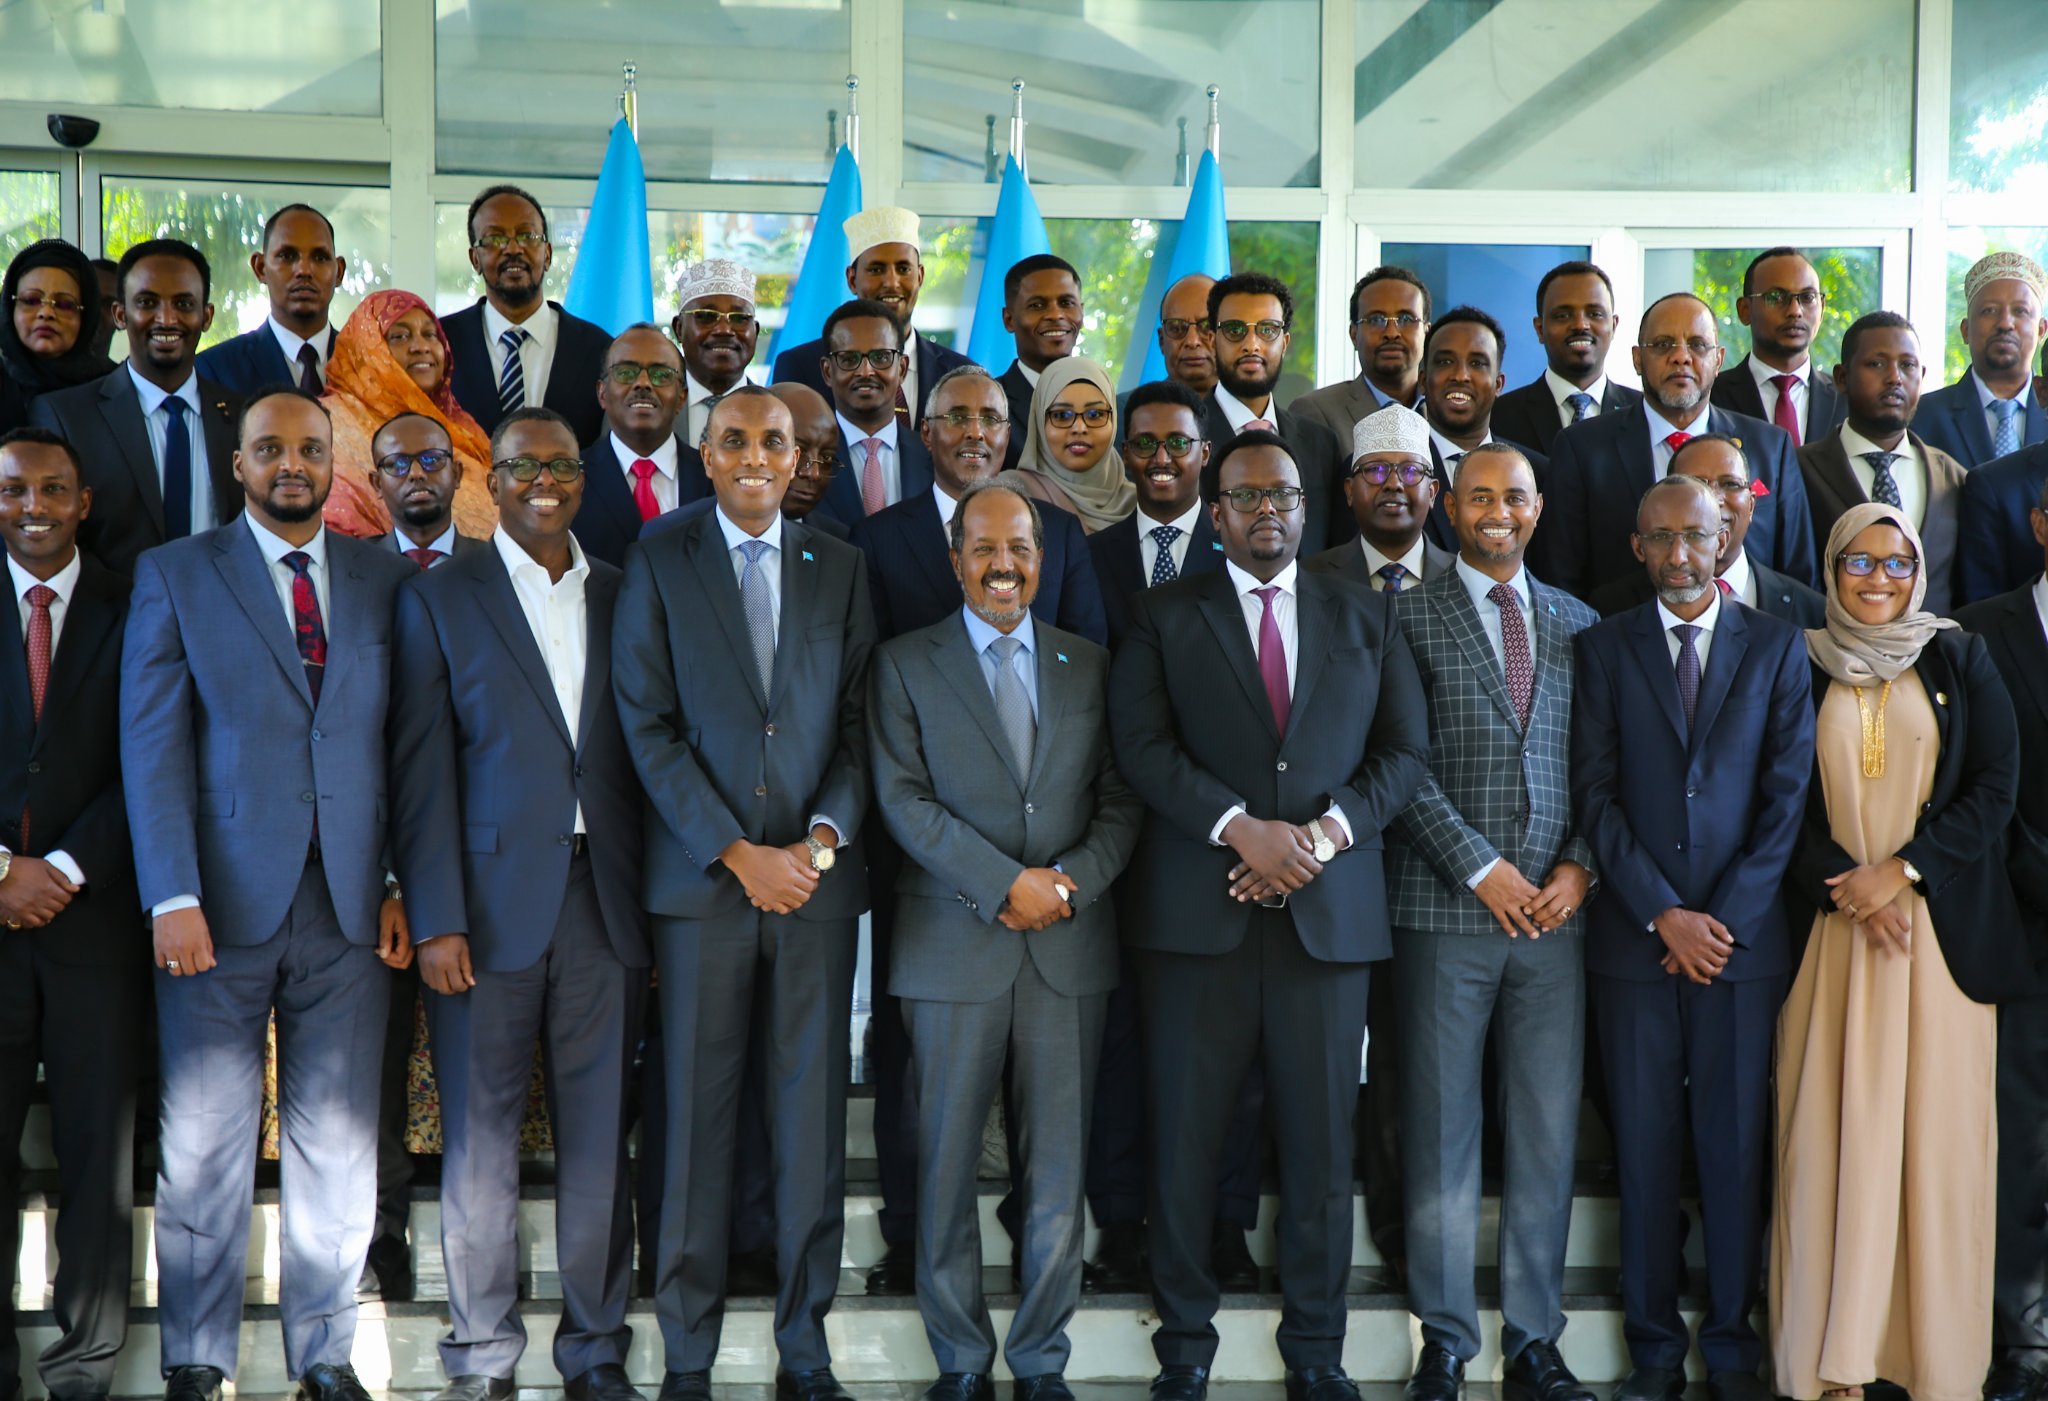 NUSOJ calls on the new Somali government to usher in a fair and equitable human rights agenda